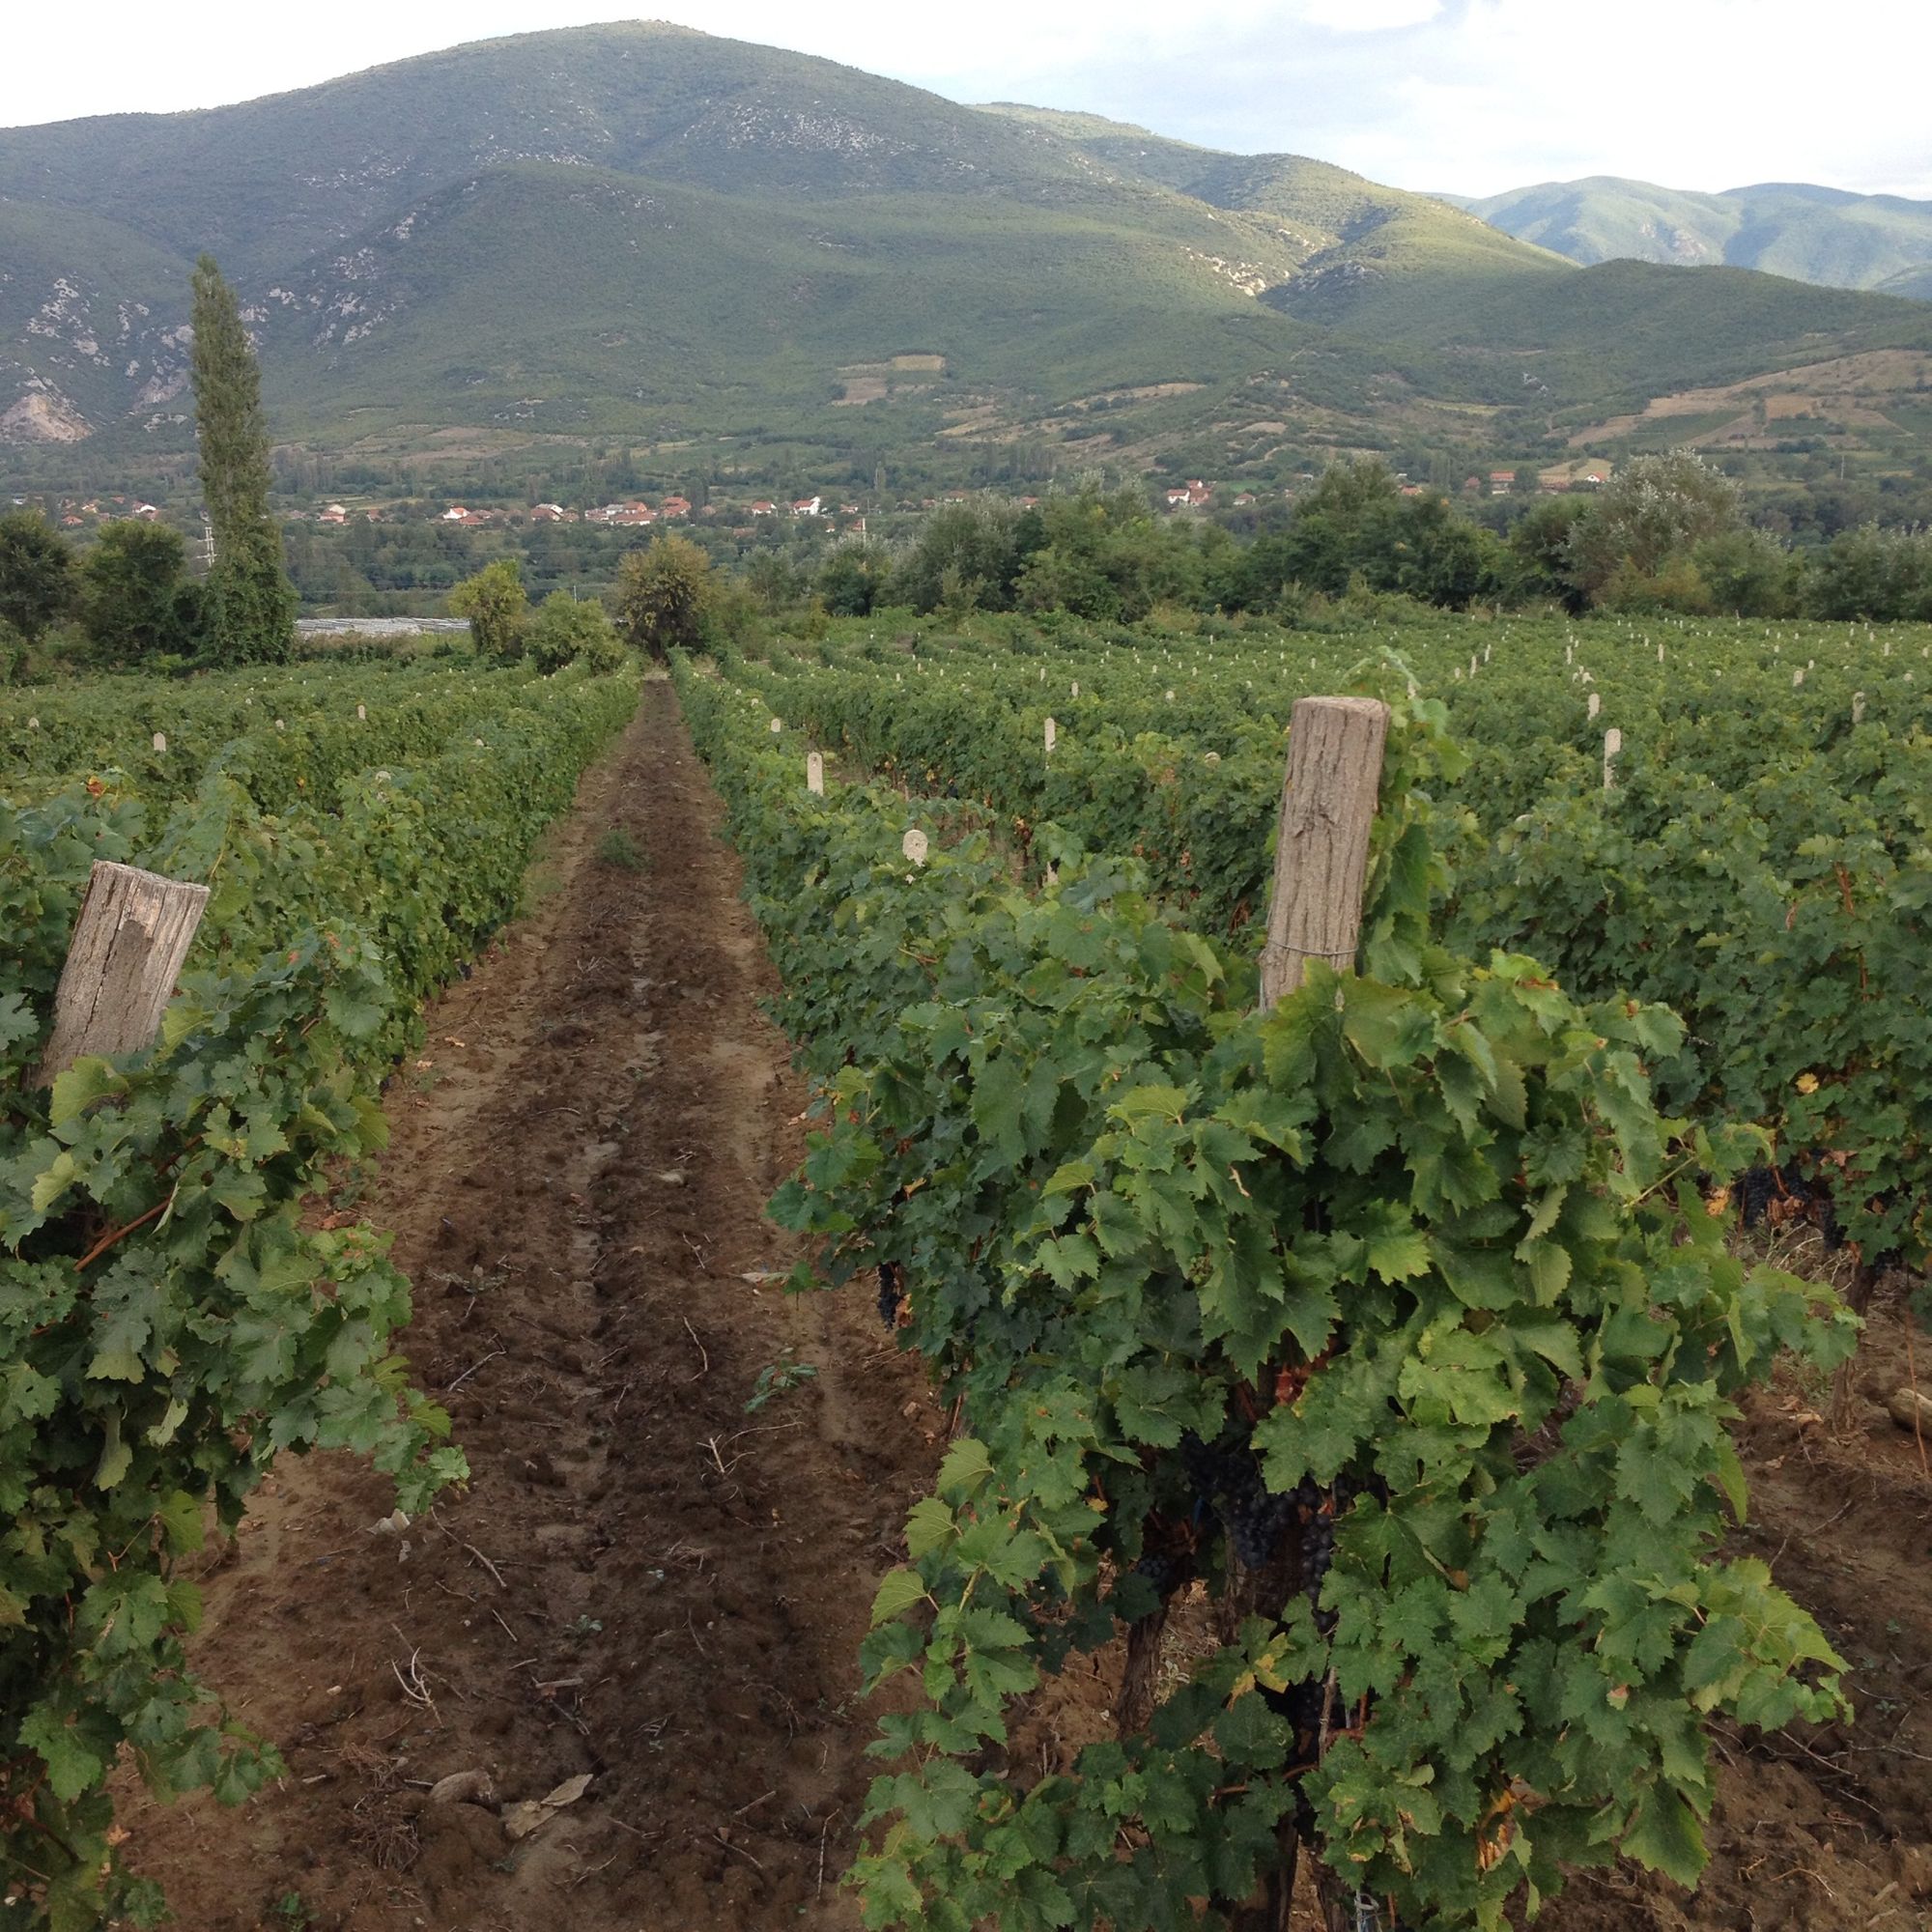 2014: A tough vintage in Macedonia